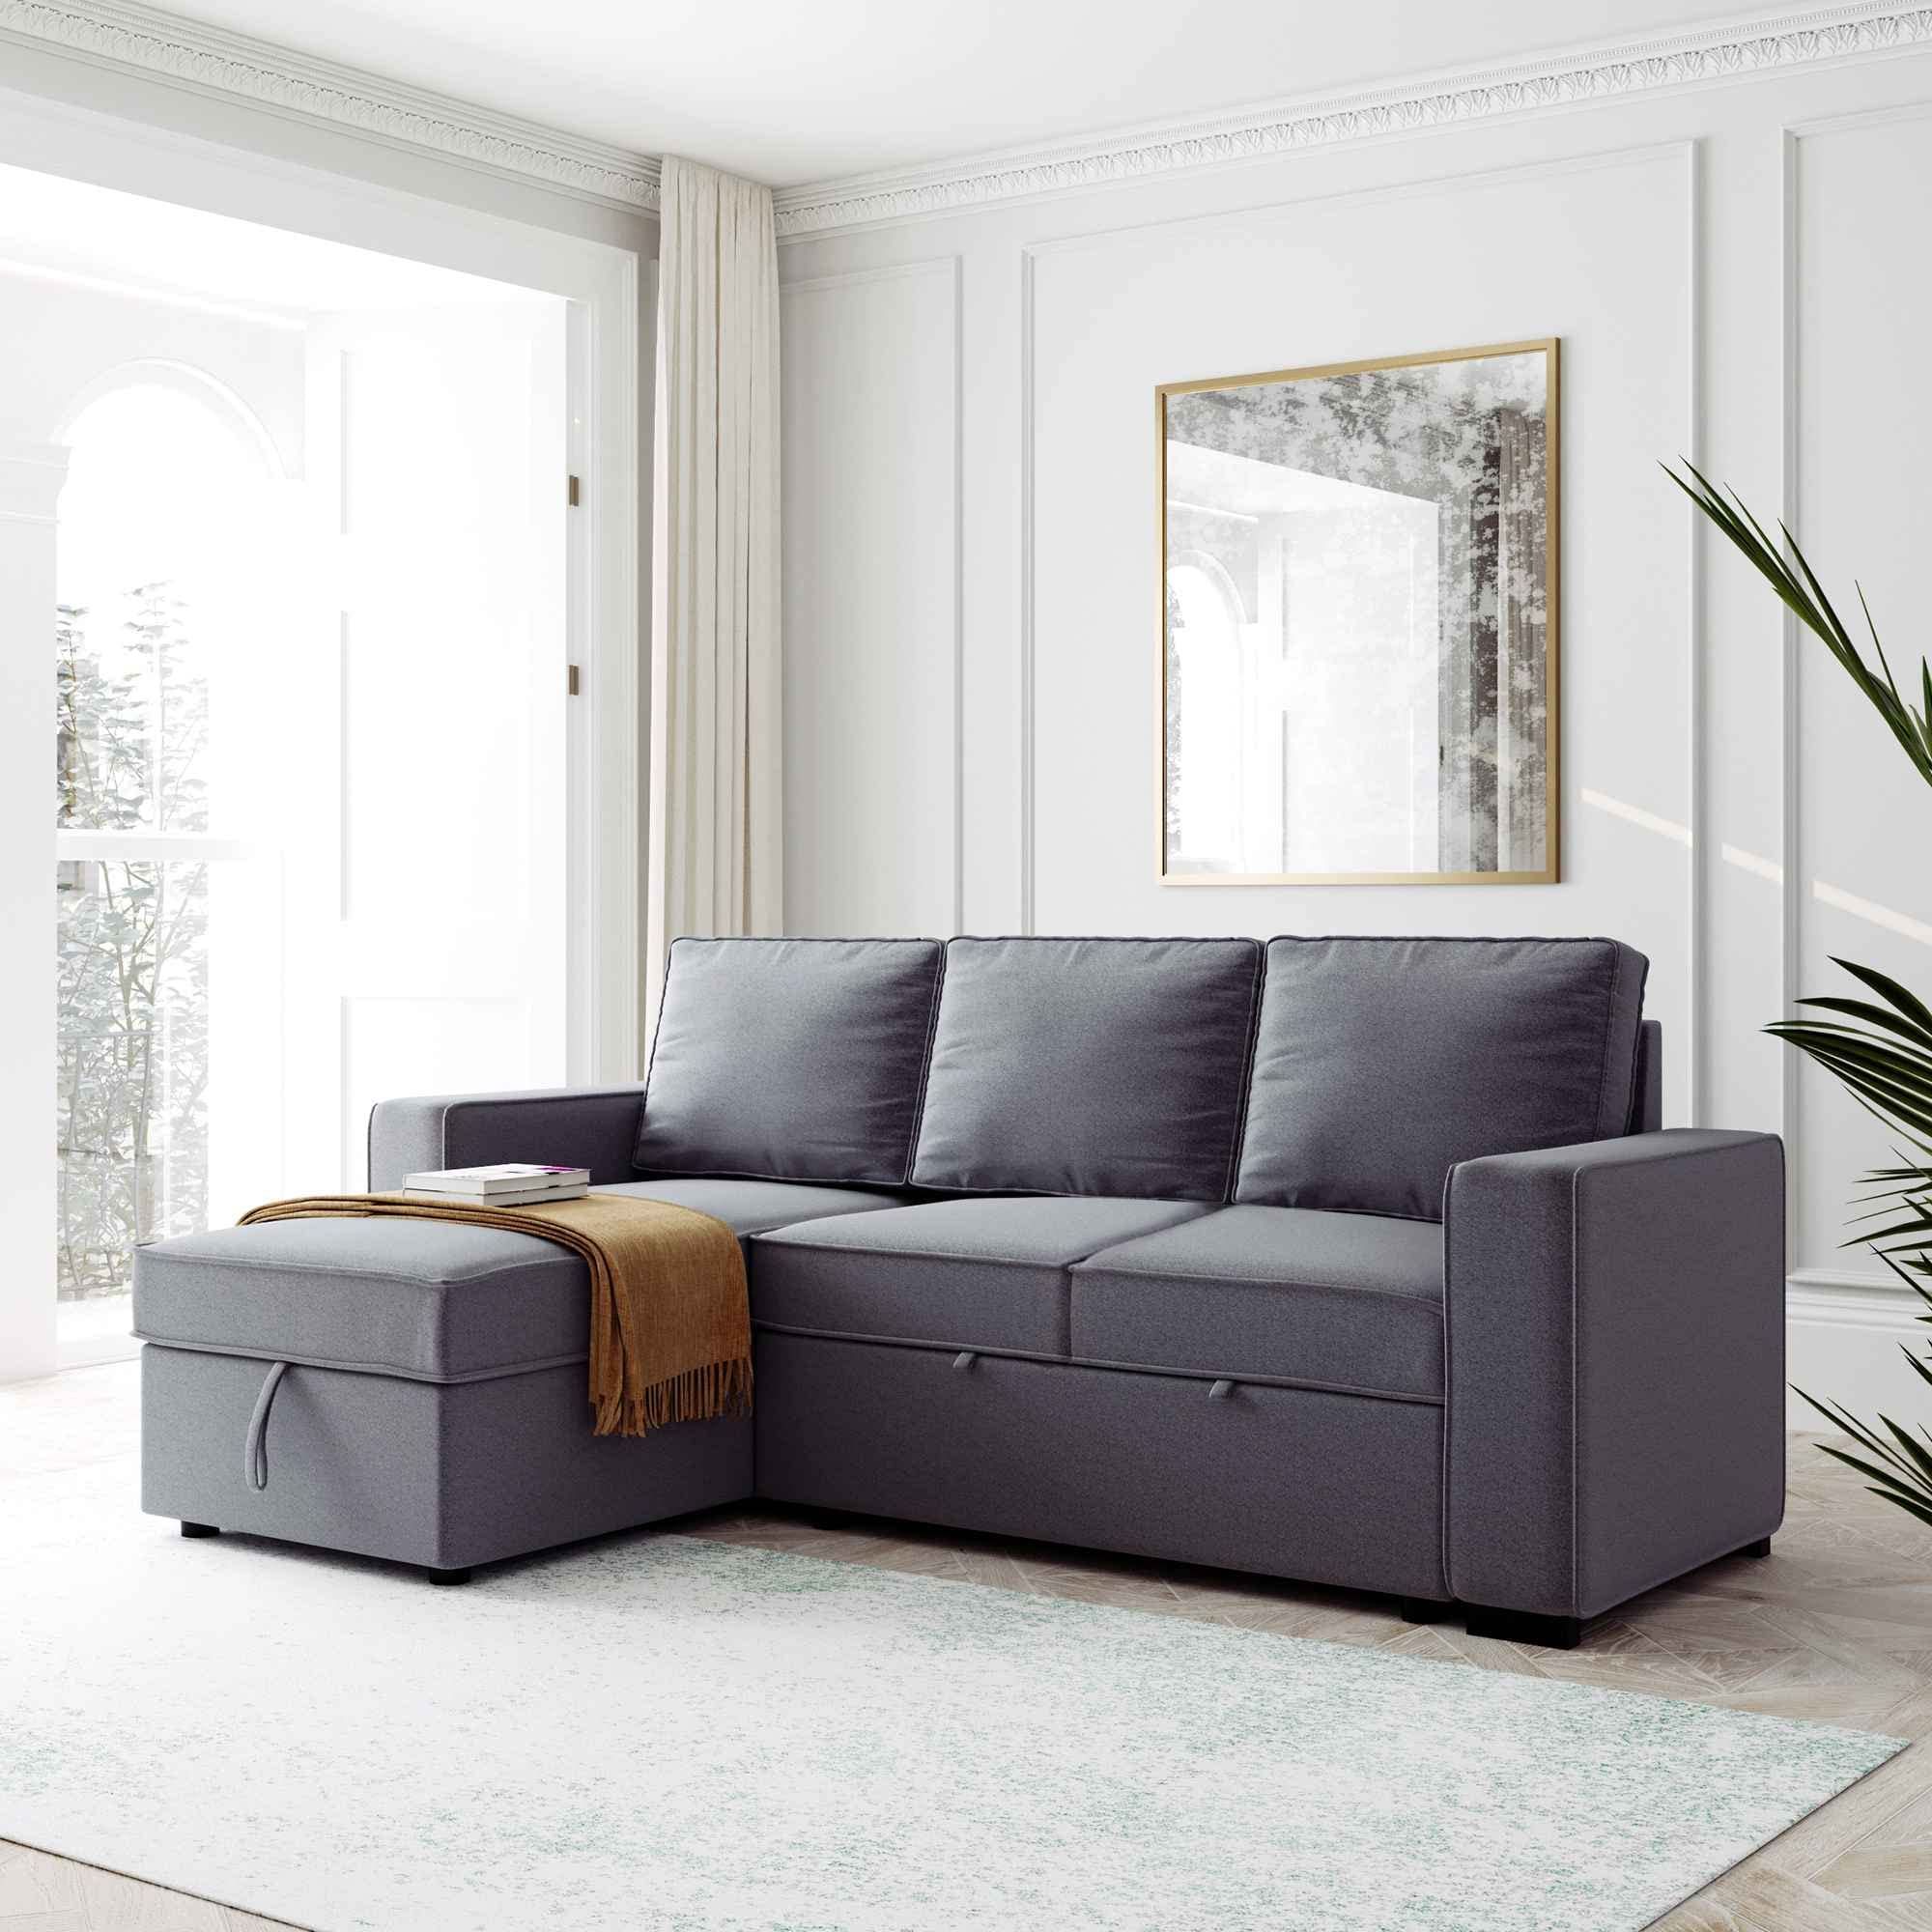 2018 Buy Aty Sectional Sofa With Pull Out Bed, Reversible L Shape Sleeper For 2 In 1 Gray Pull Out Sofa Beds (View 9 of 15)